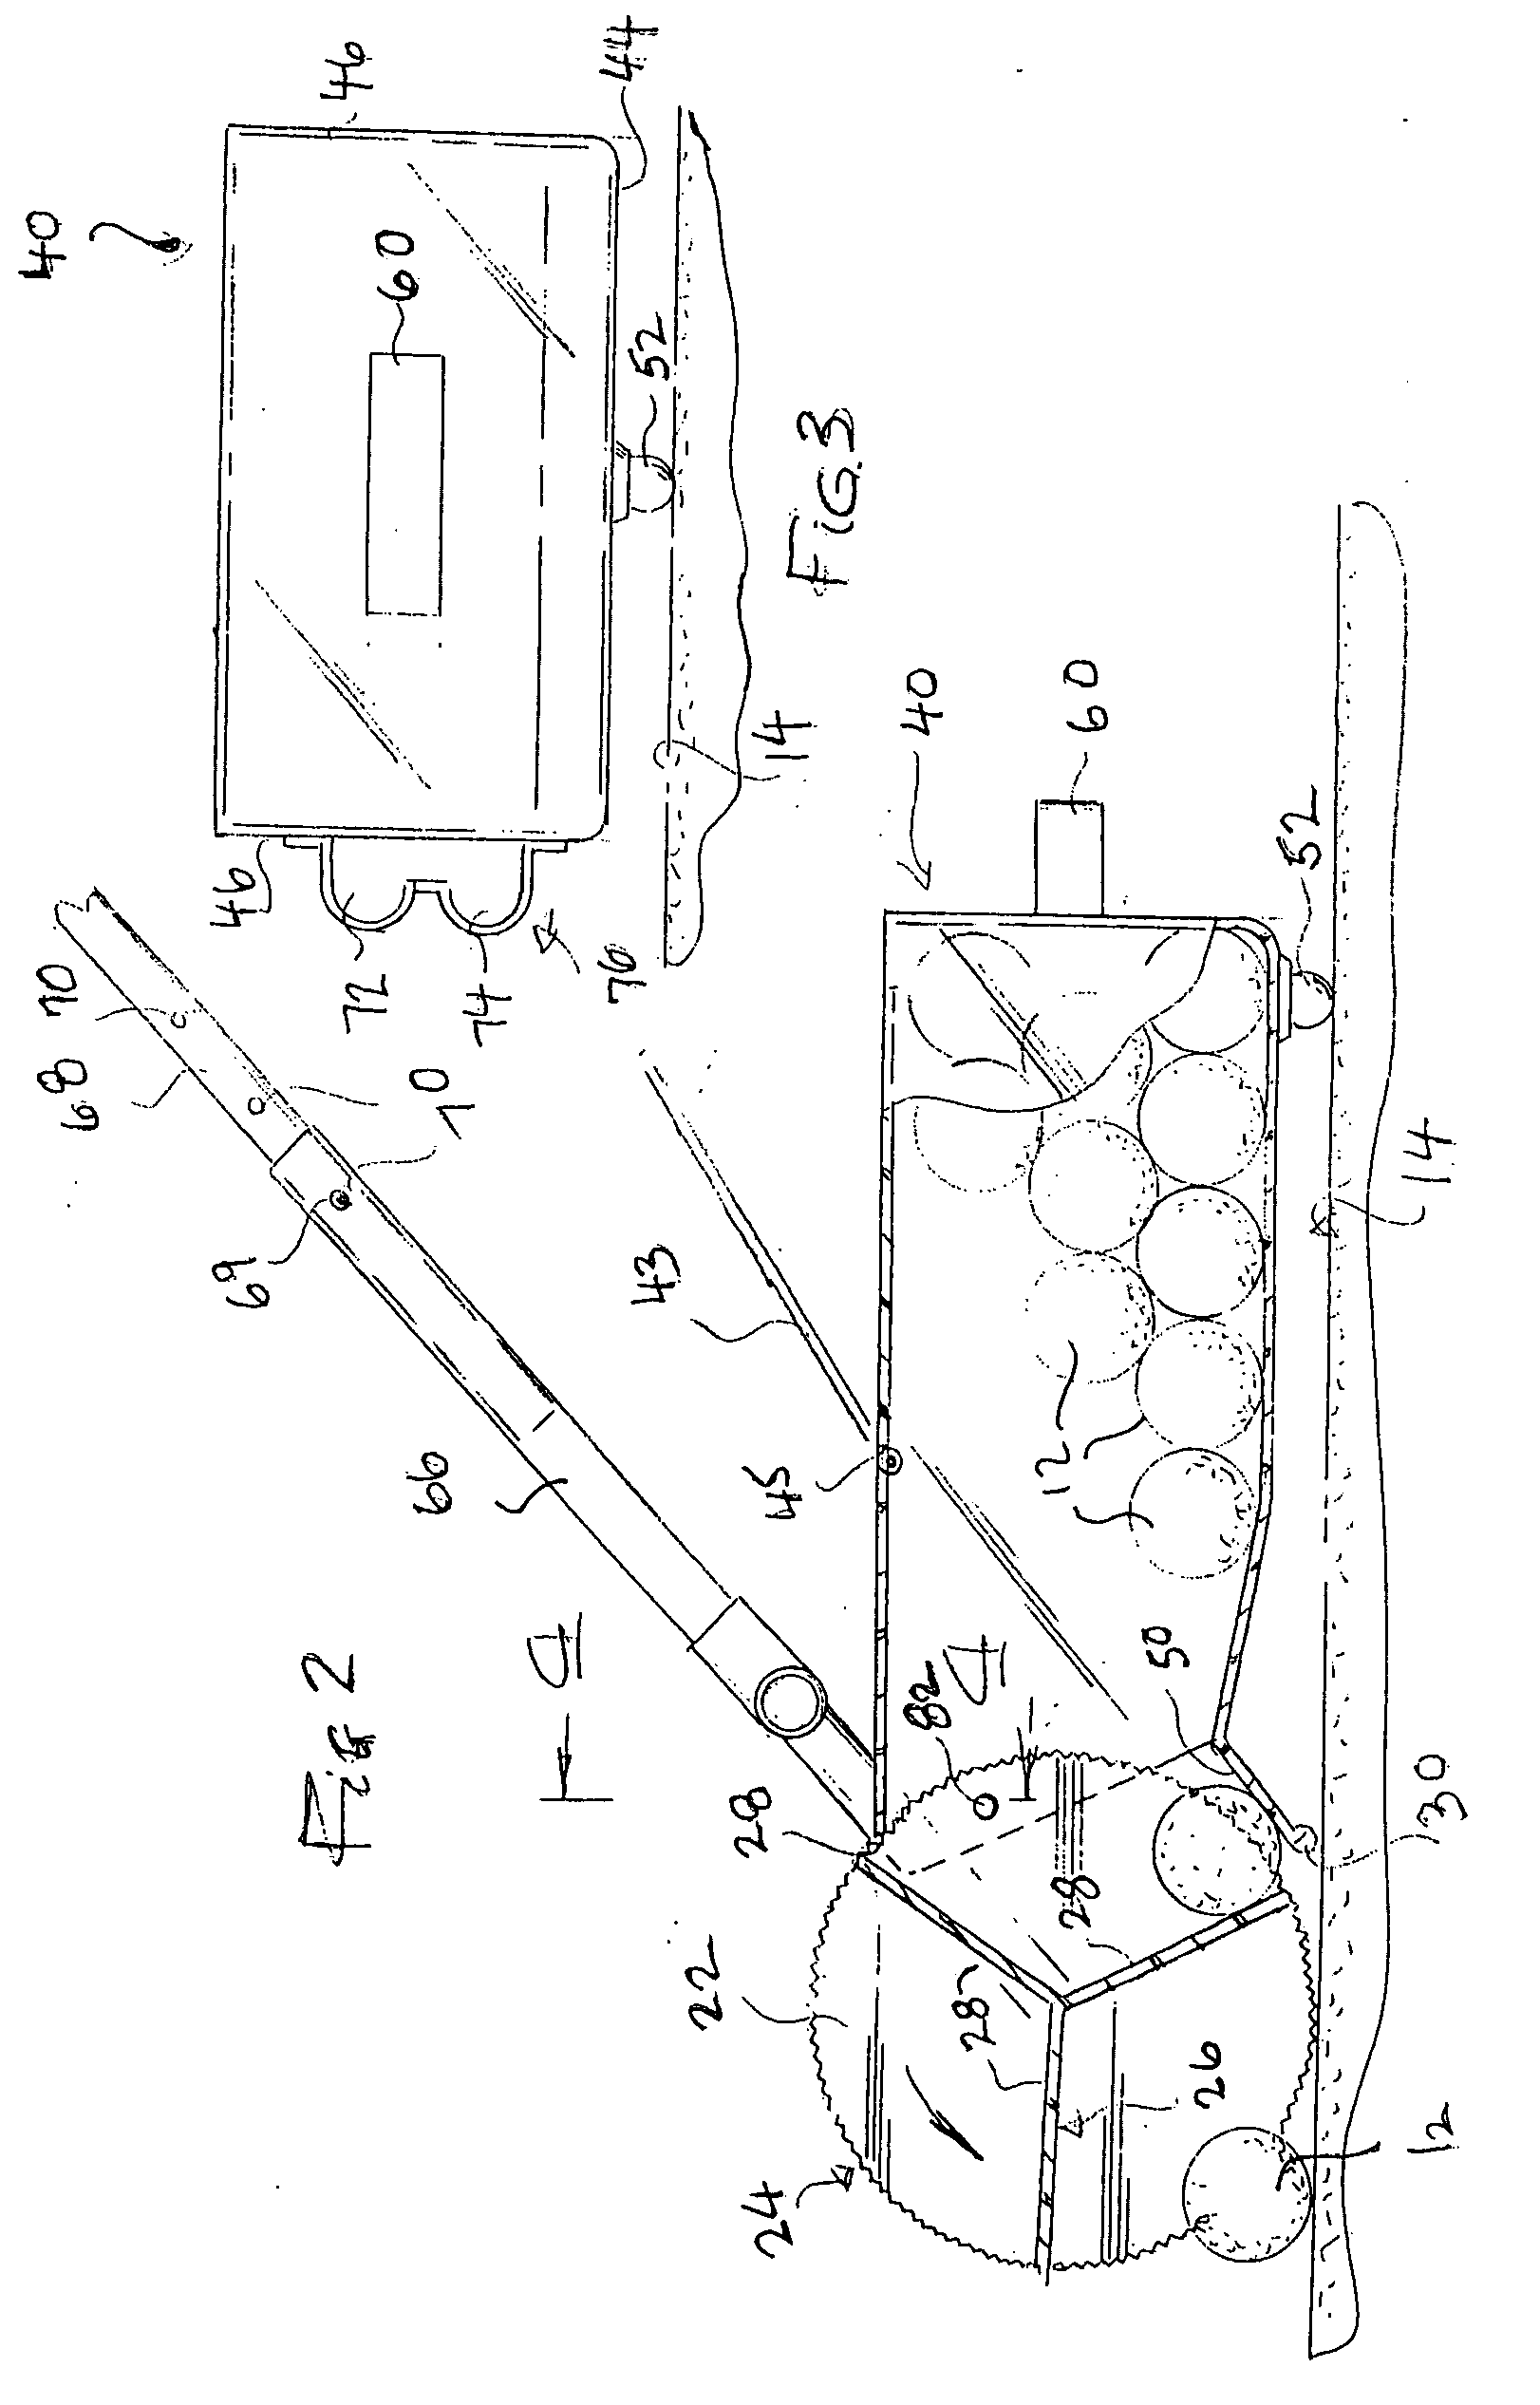 Tennis ball collection, dispensing, and transport apparatus